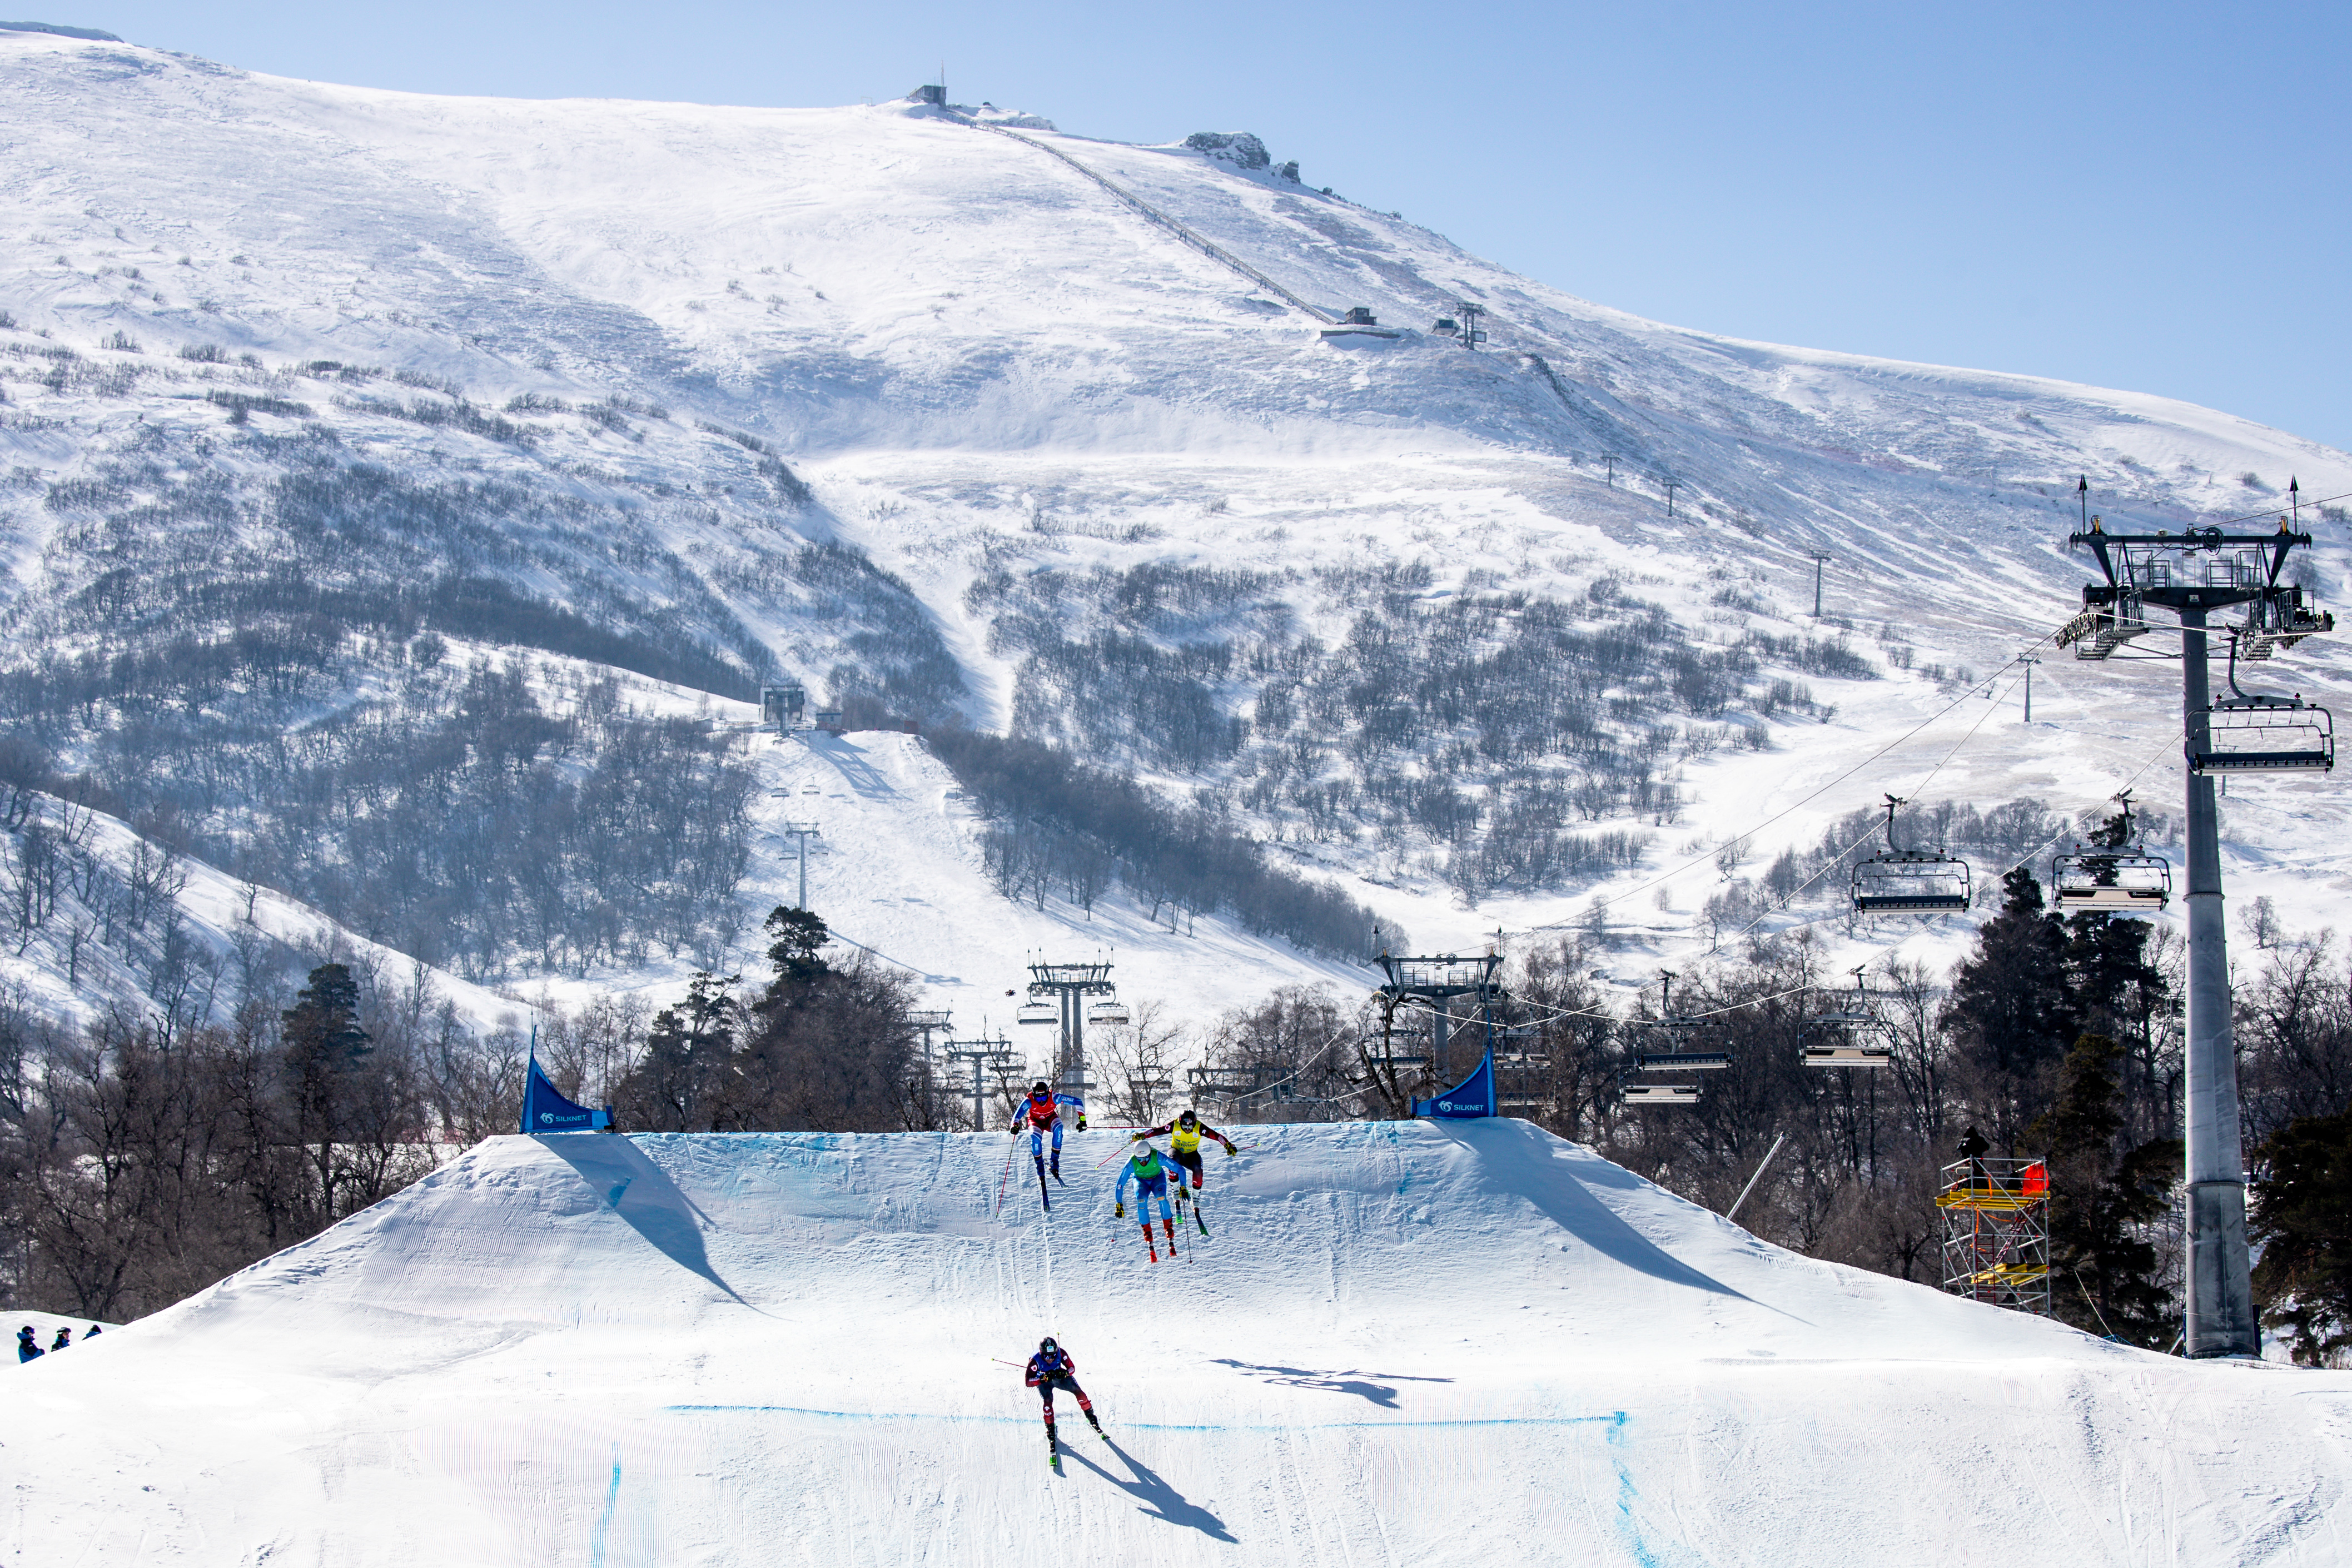 Ski cross is one of the most interesting ski disciplines to watch